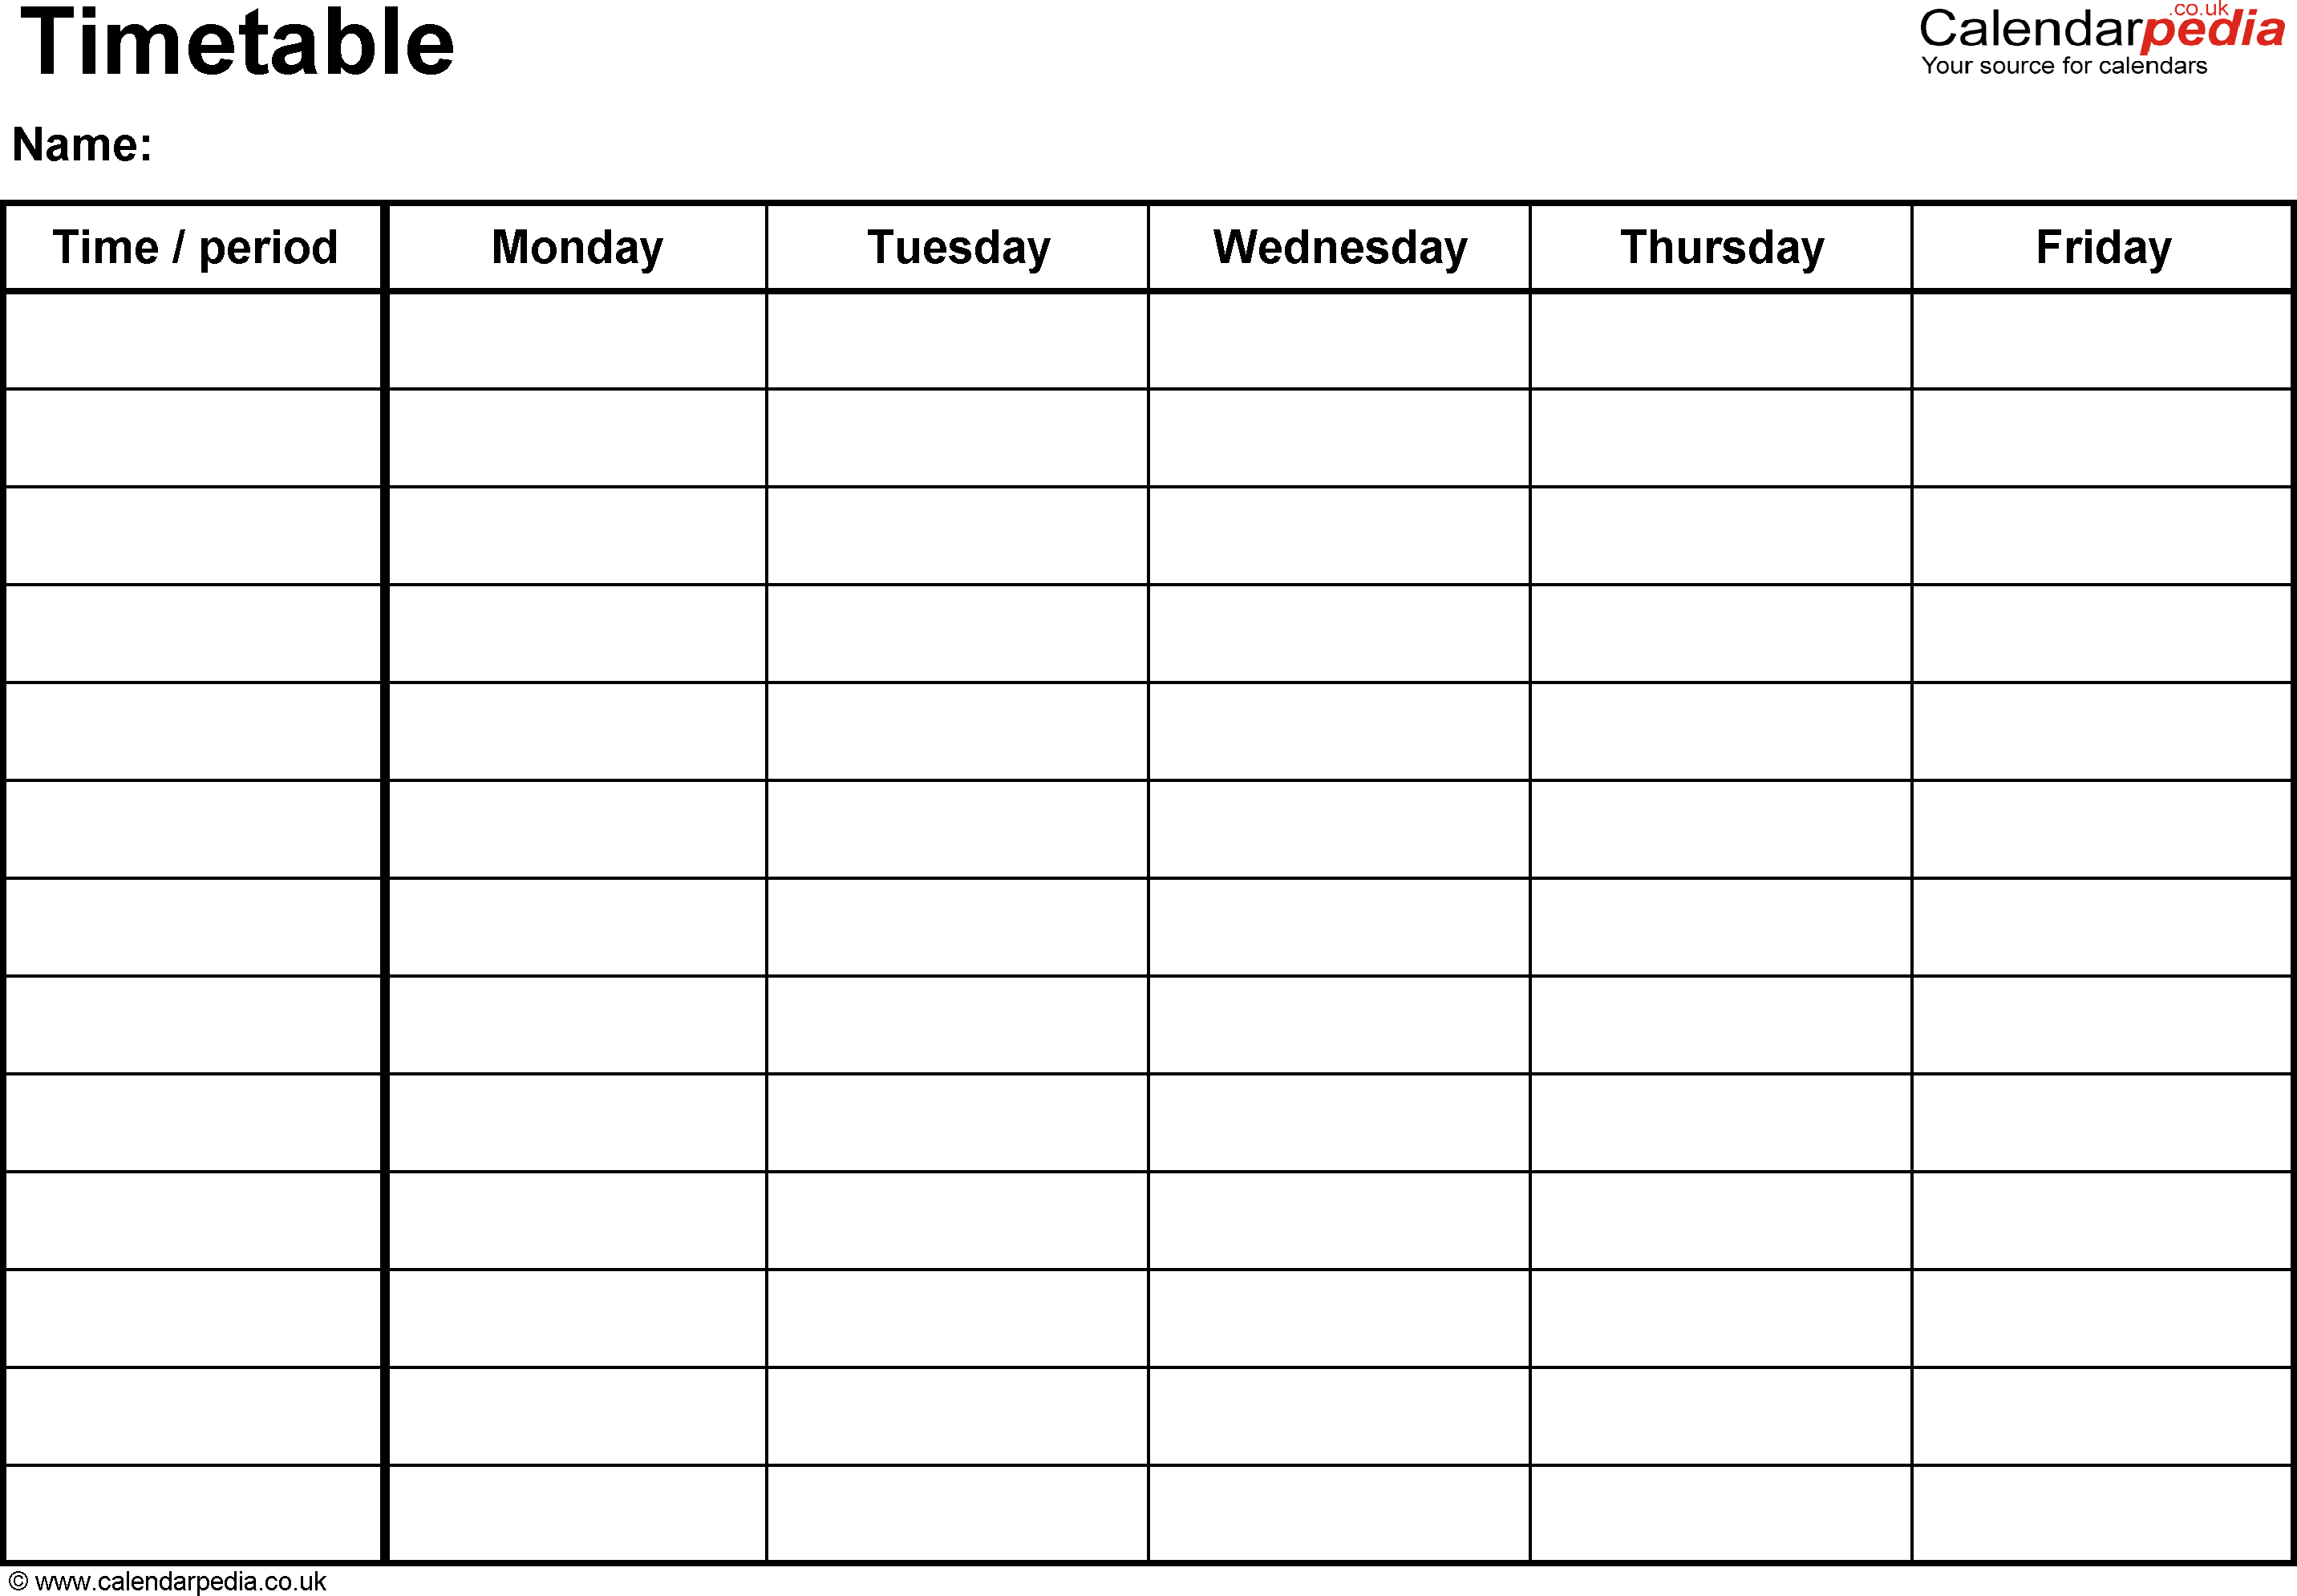 003 Timetable Monday Friday Template Ideas Weekly Schedule